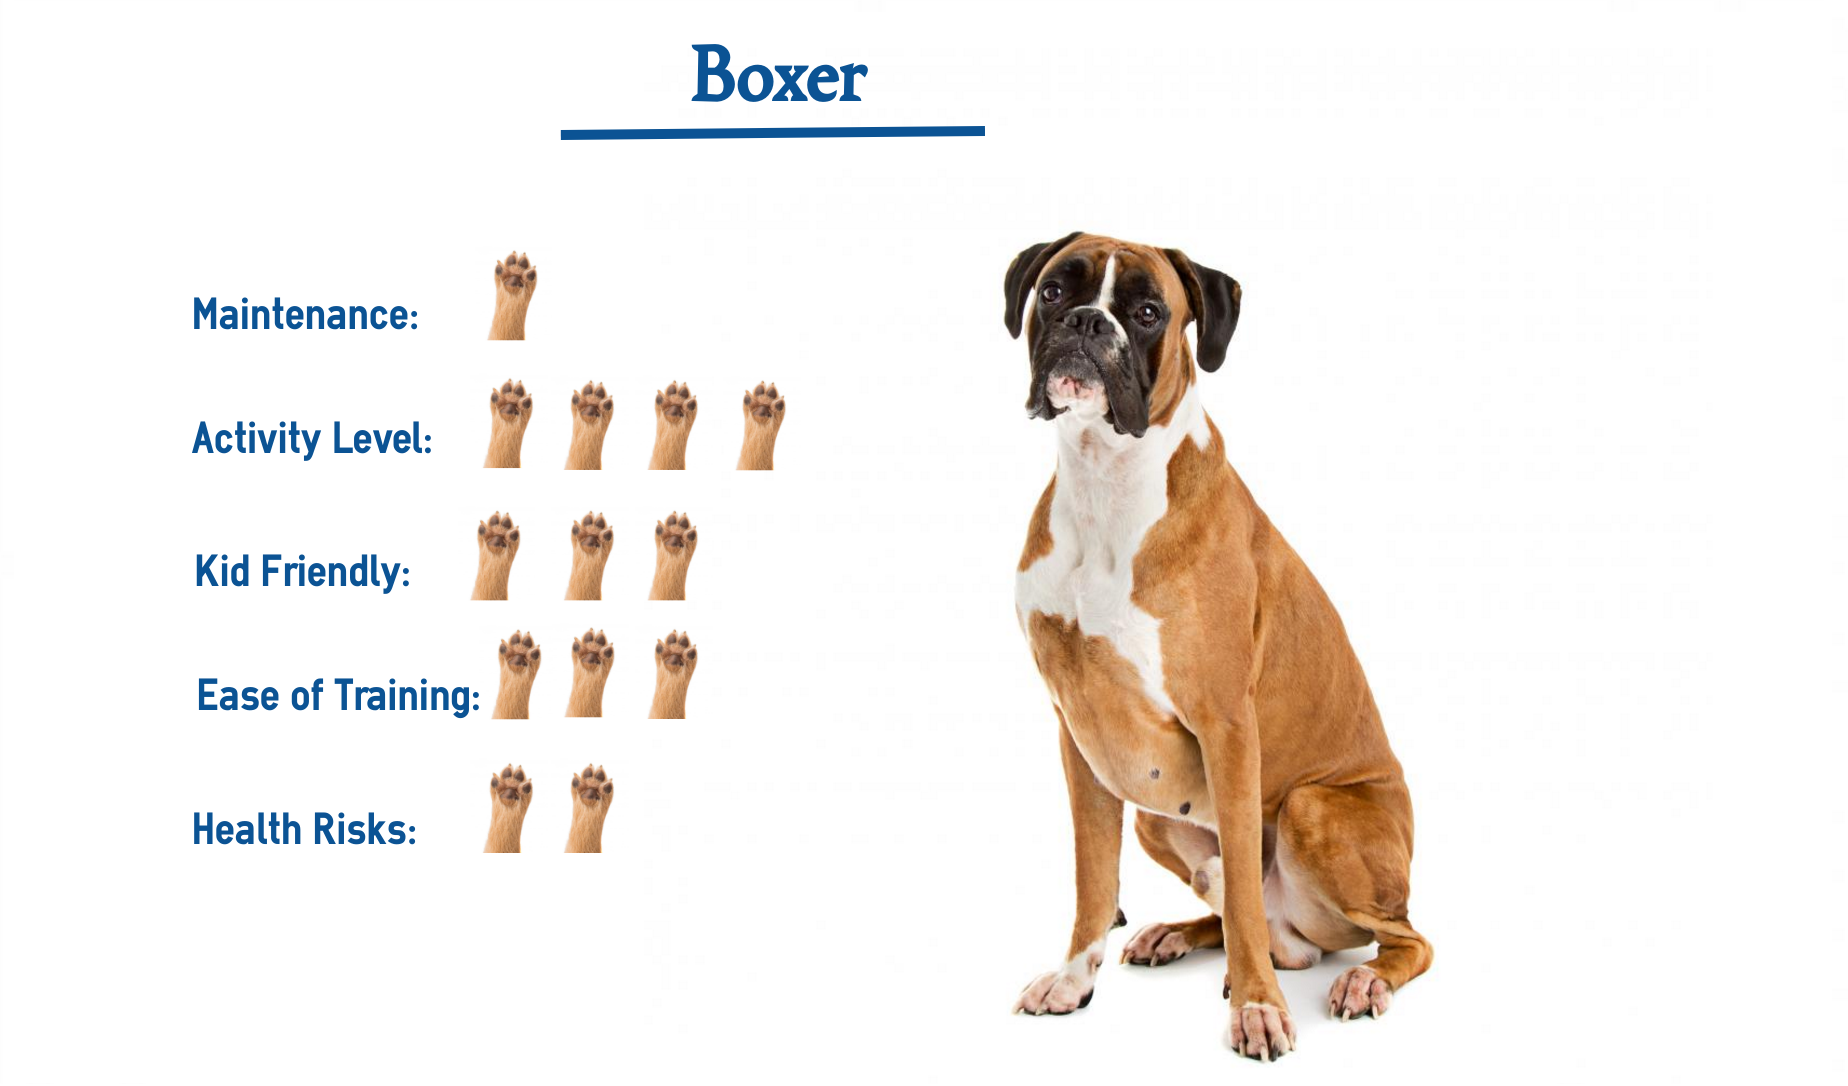 Funny Boxer Dogs